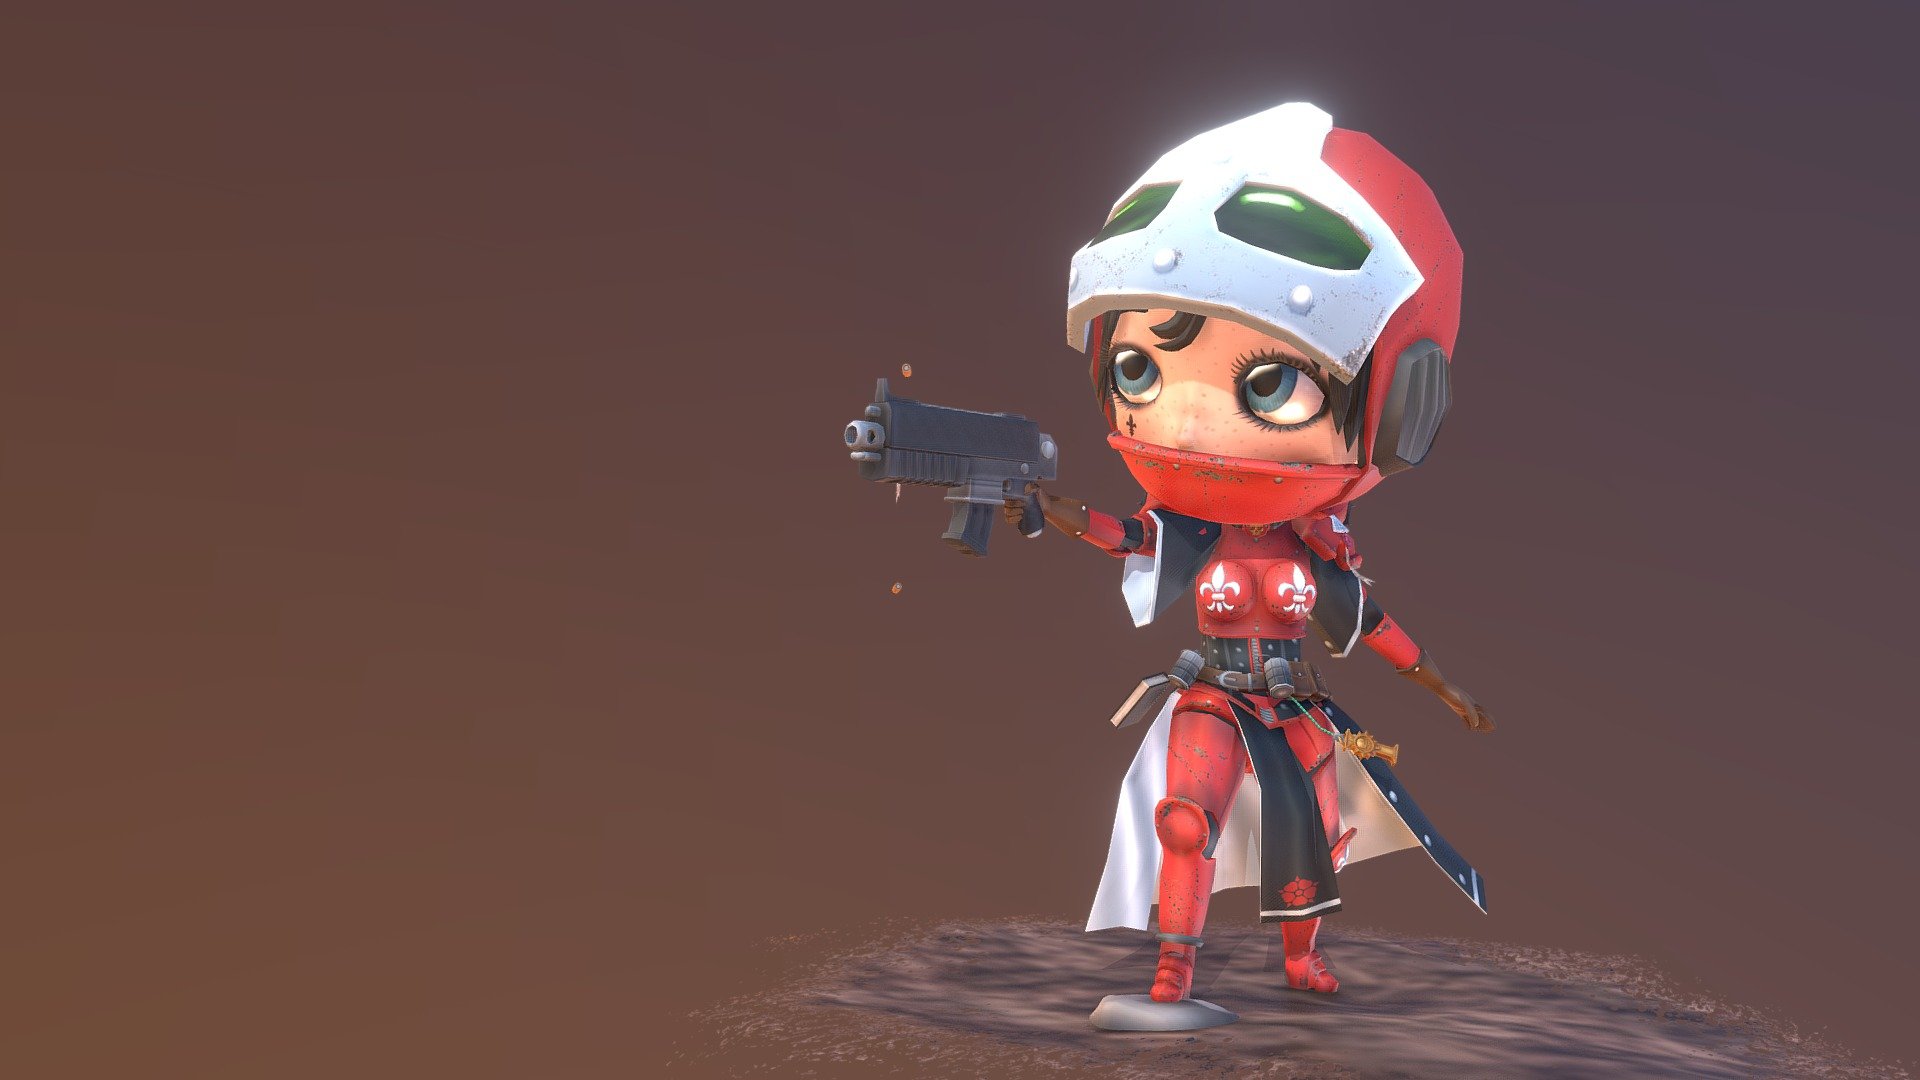 A pet project of mine; I've recently gotten into Warhammer 40K with the release of the Sisters of Battle (Adepta Sororitas) - This is my take on a chibi-version of a Sister from the Order of the Bloody Rose, Sister Anira.

Done in Autodesk Maya and textured (hand-painted) in Adobe Photoshop 3d model